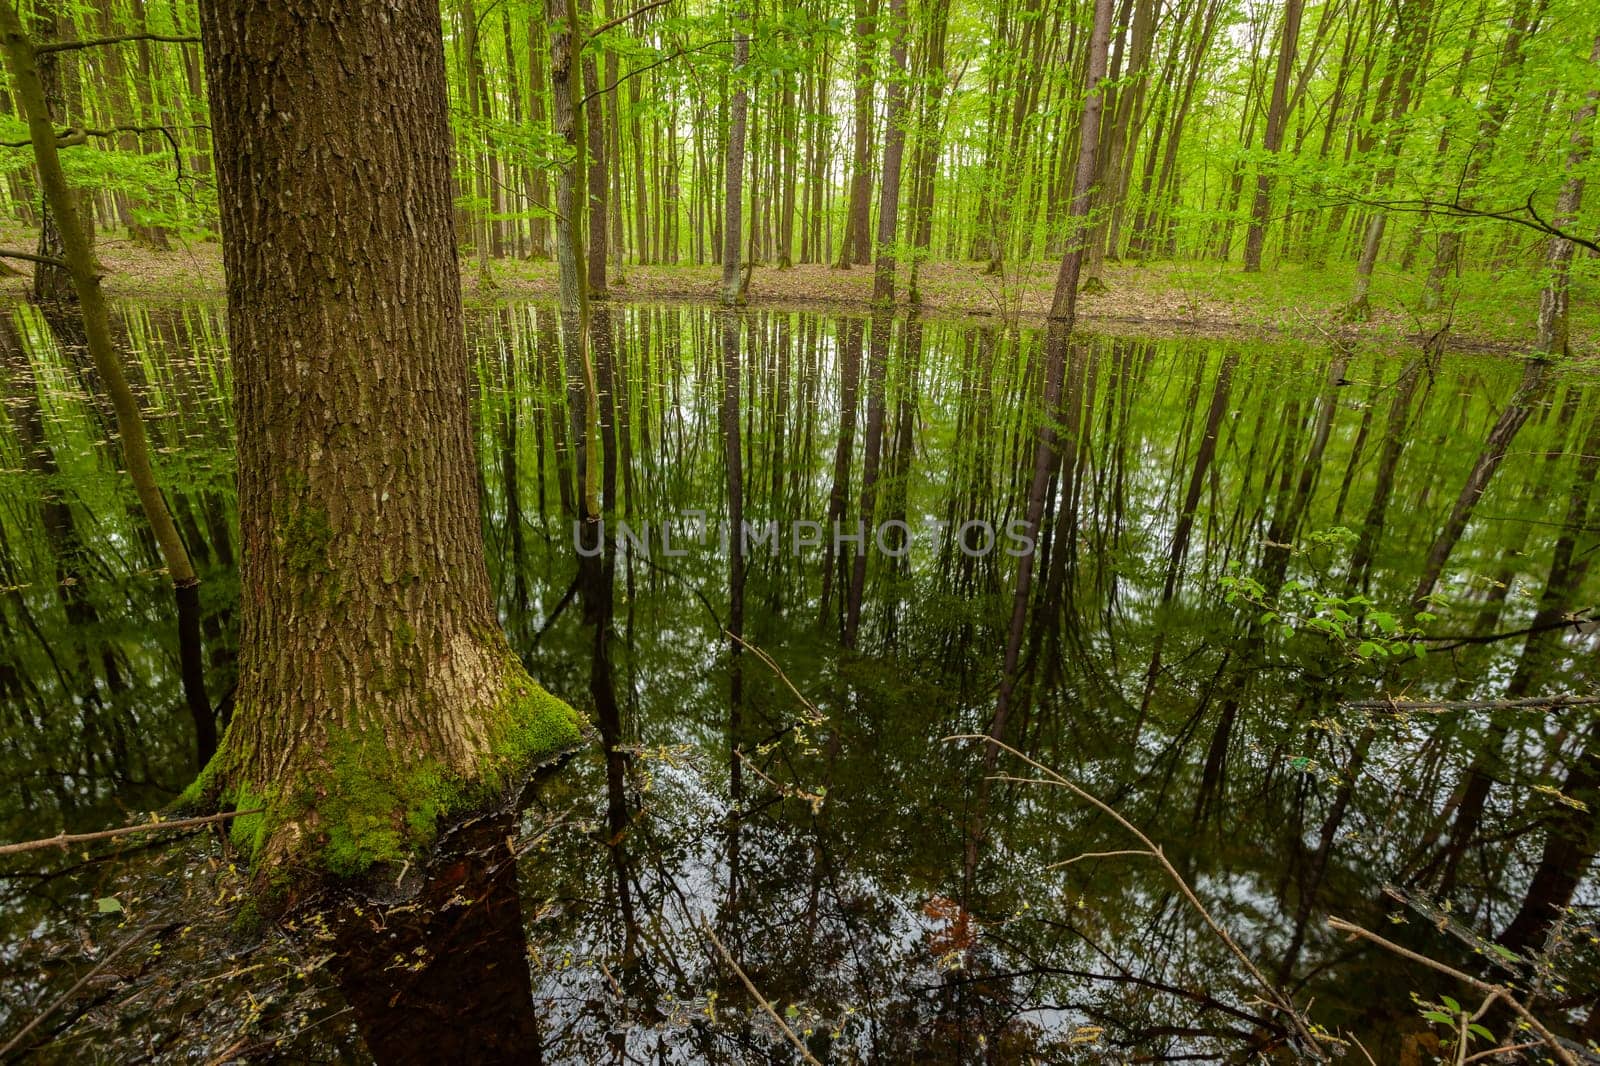 Wet forest and the reflection of trees in the water, view on a spring day by darekb22